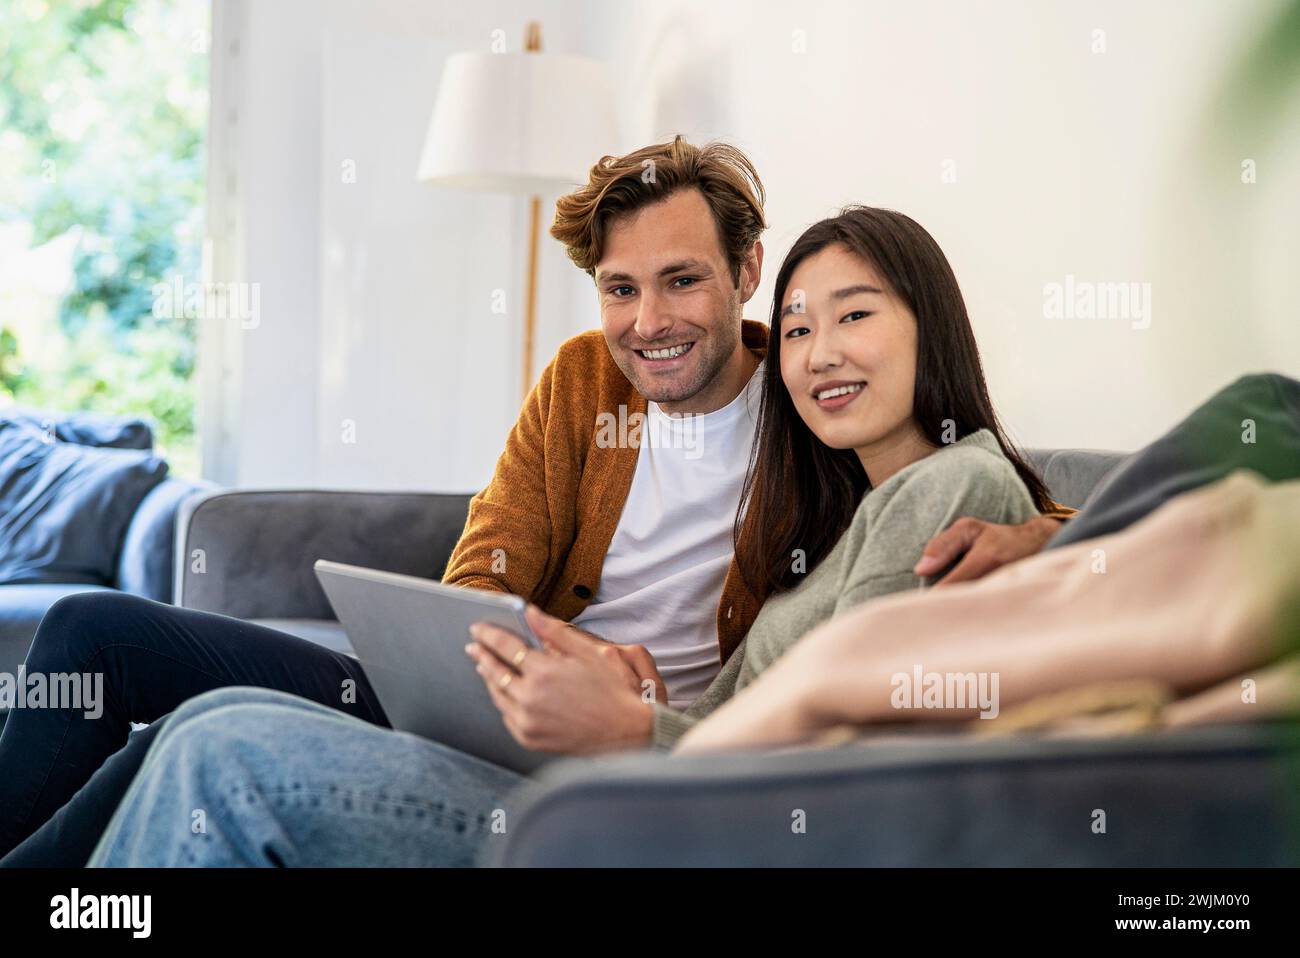 Adult couple looking at the camera while sitting on sofa using digital tablet Stock Photo